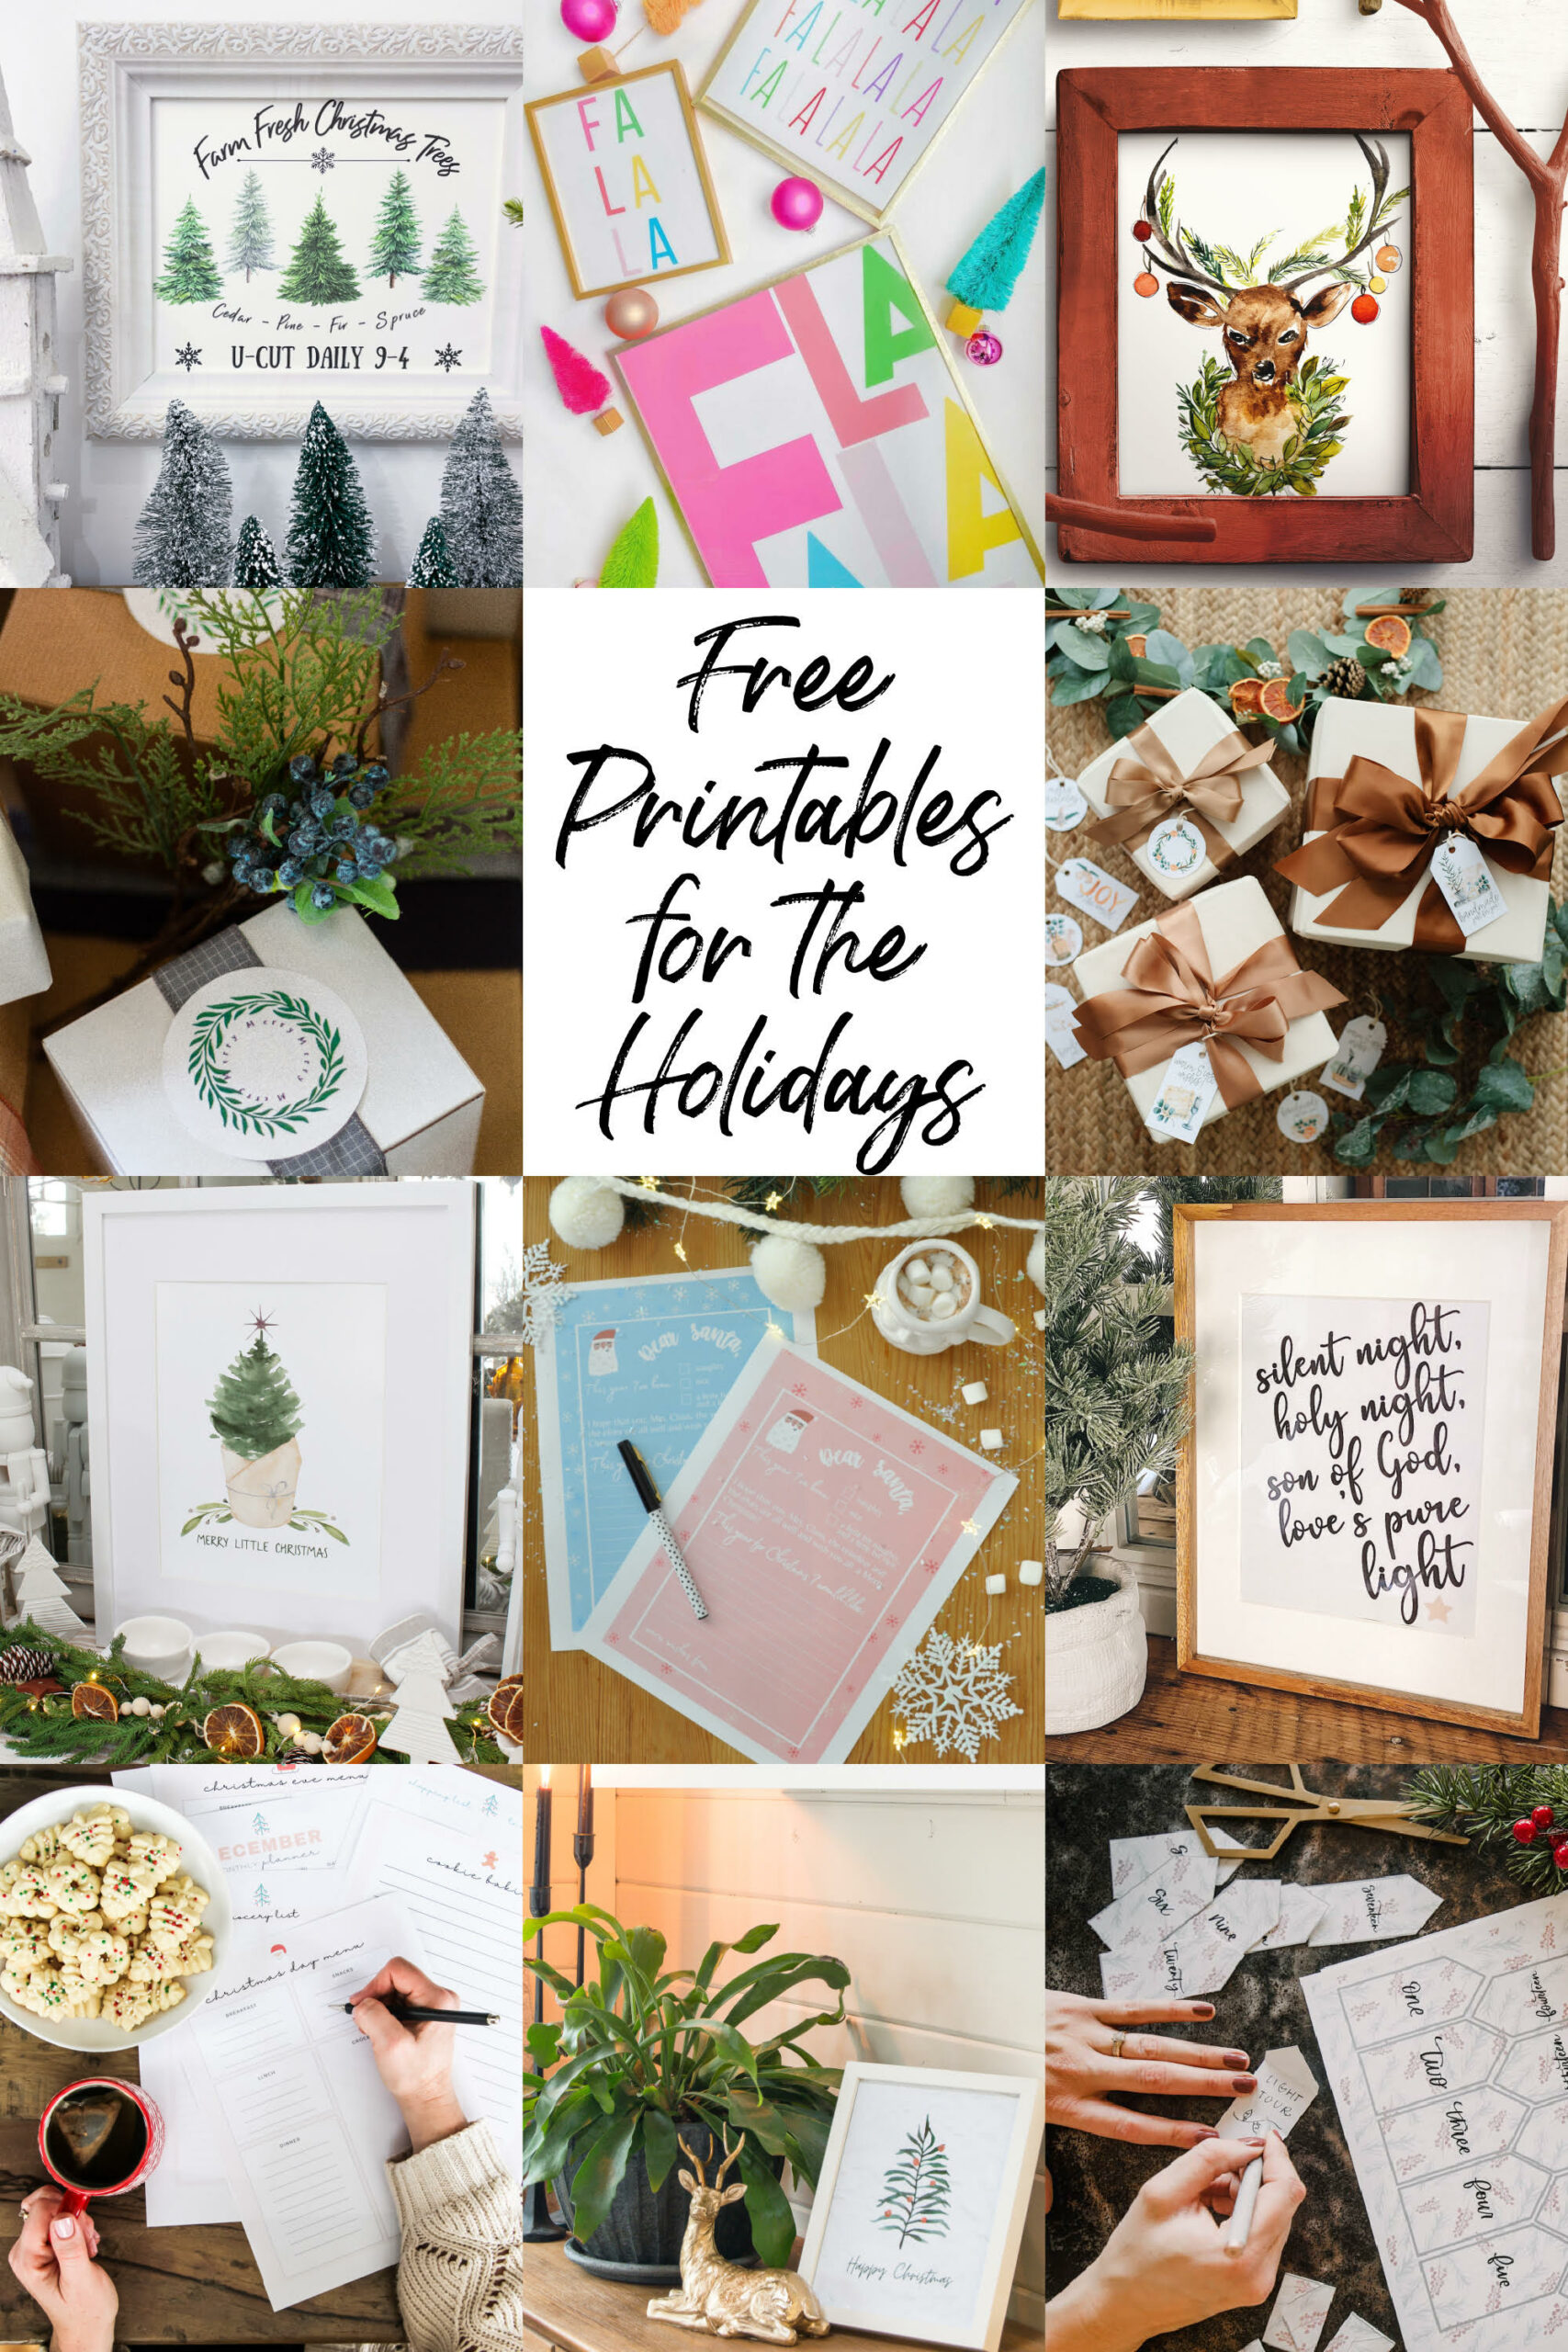 Free printables for the holidays!